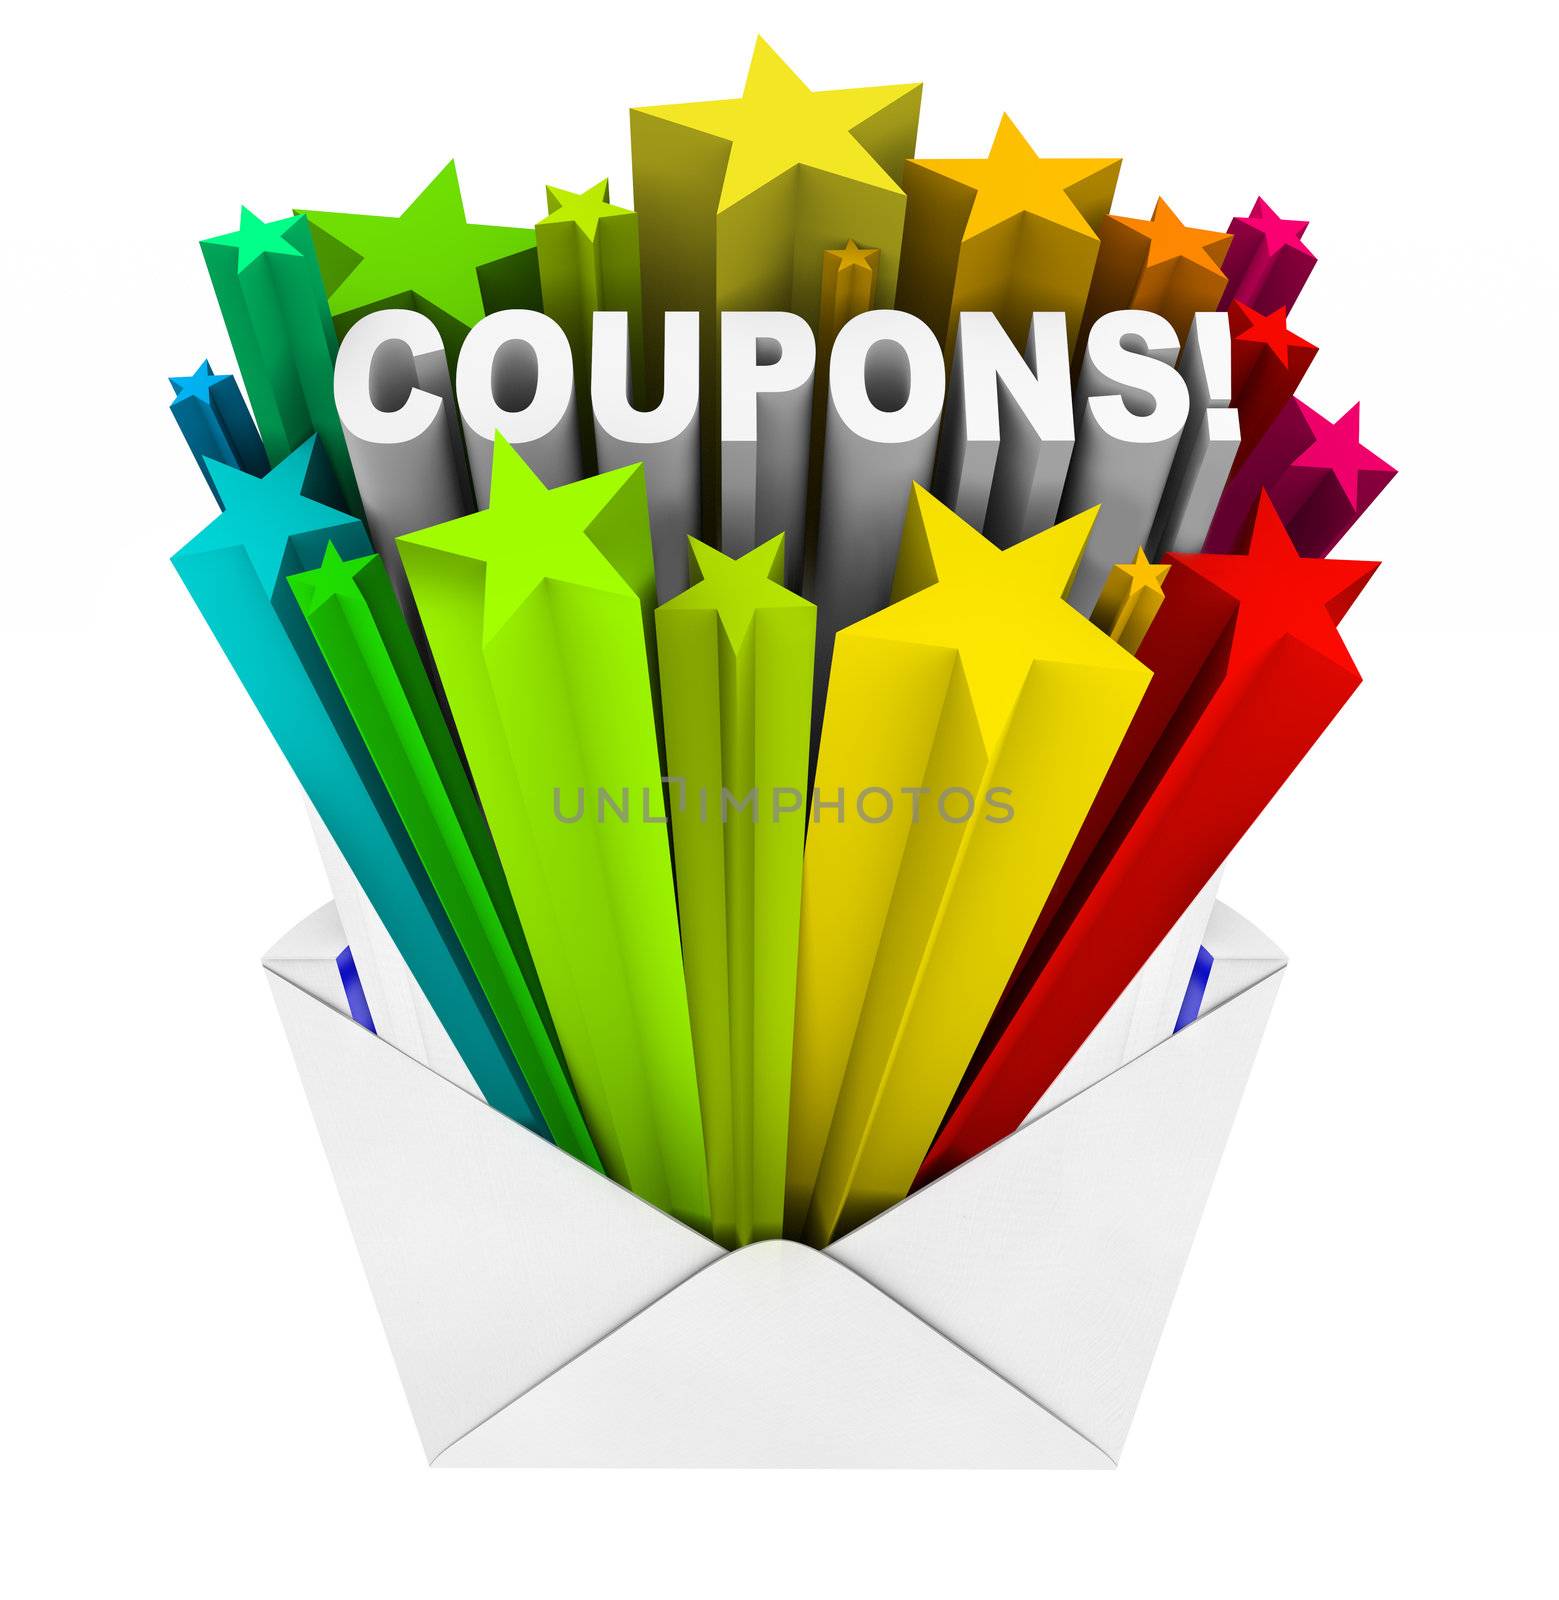 An envelope opening to show a burst of stars and the word Coupons to give you special savings so you can redeem a coupon and save when you buy the things you need at a store or online retailer